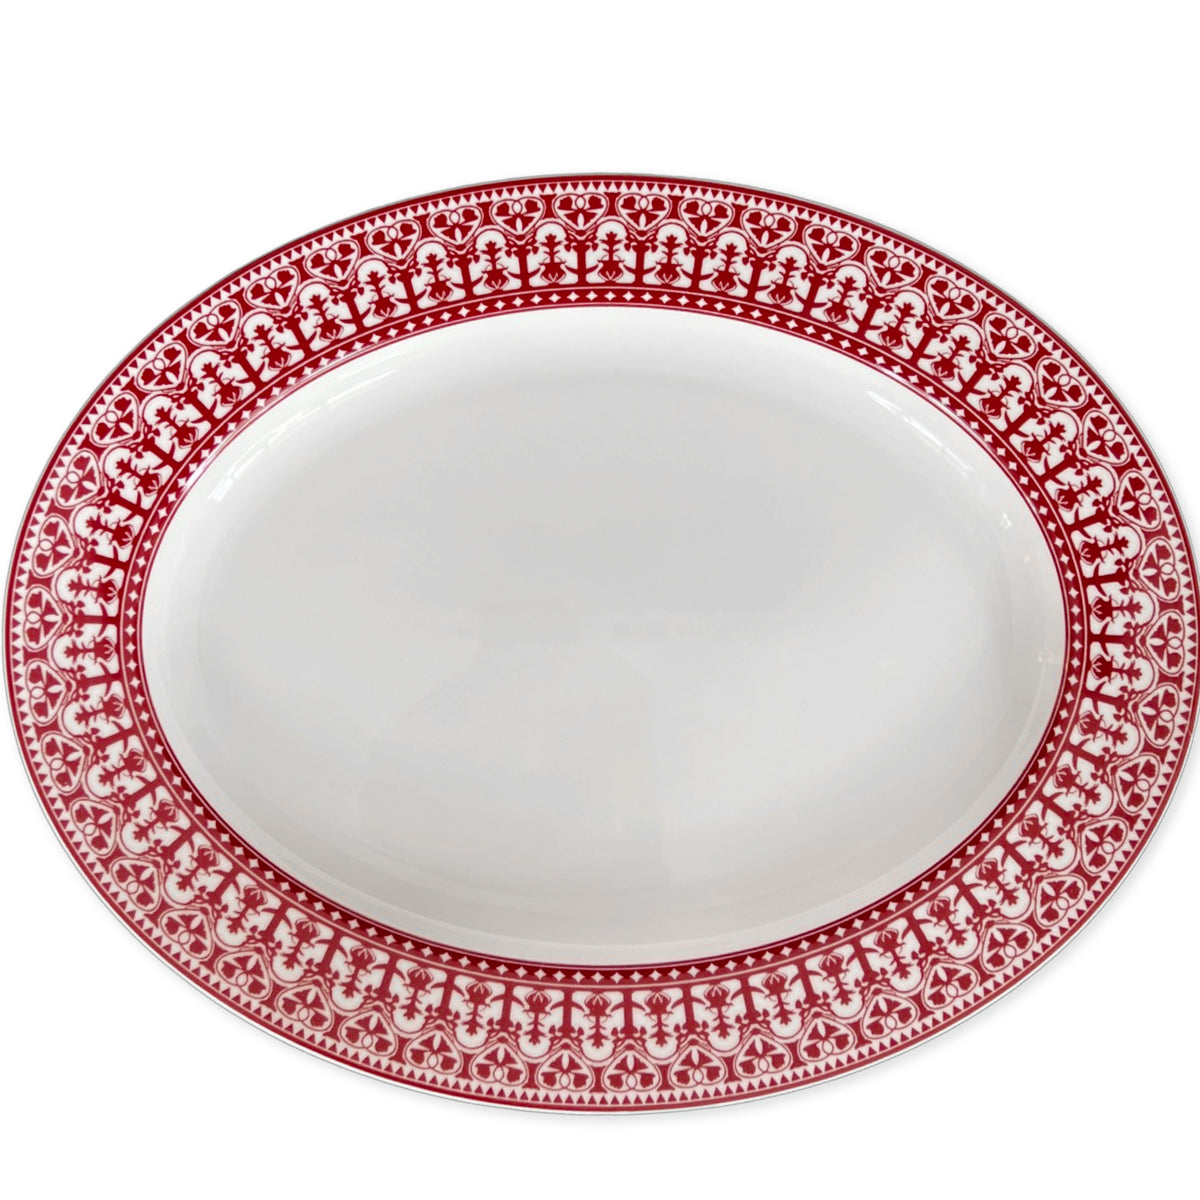 Casablanca crimson large oval platter in red and white, high-fired porcelainffrom Caskata